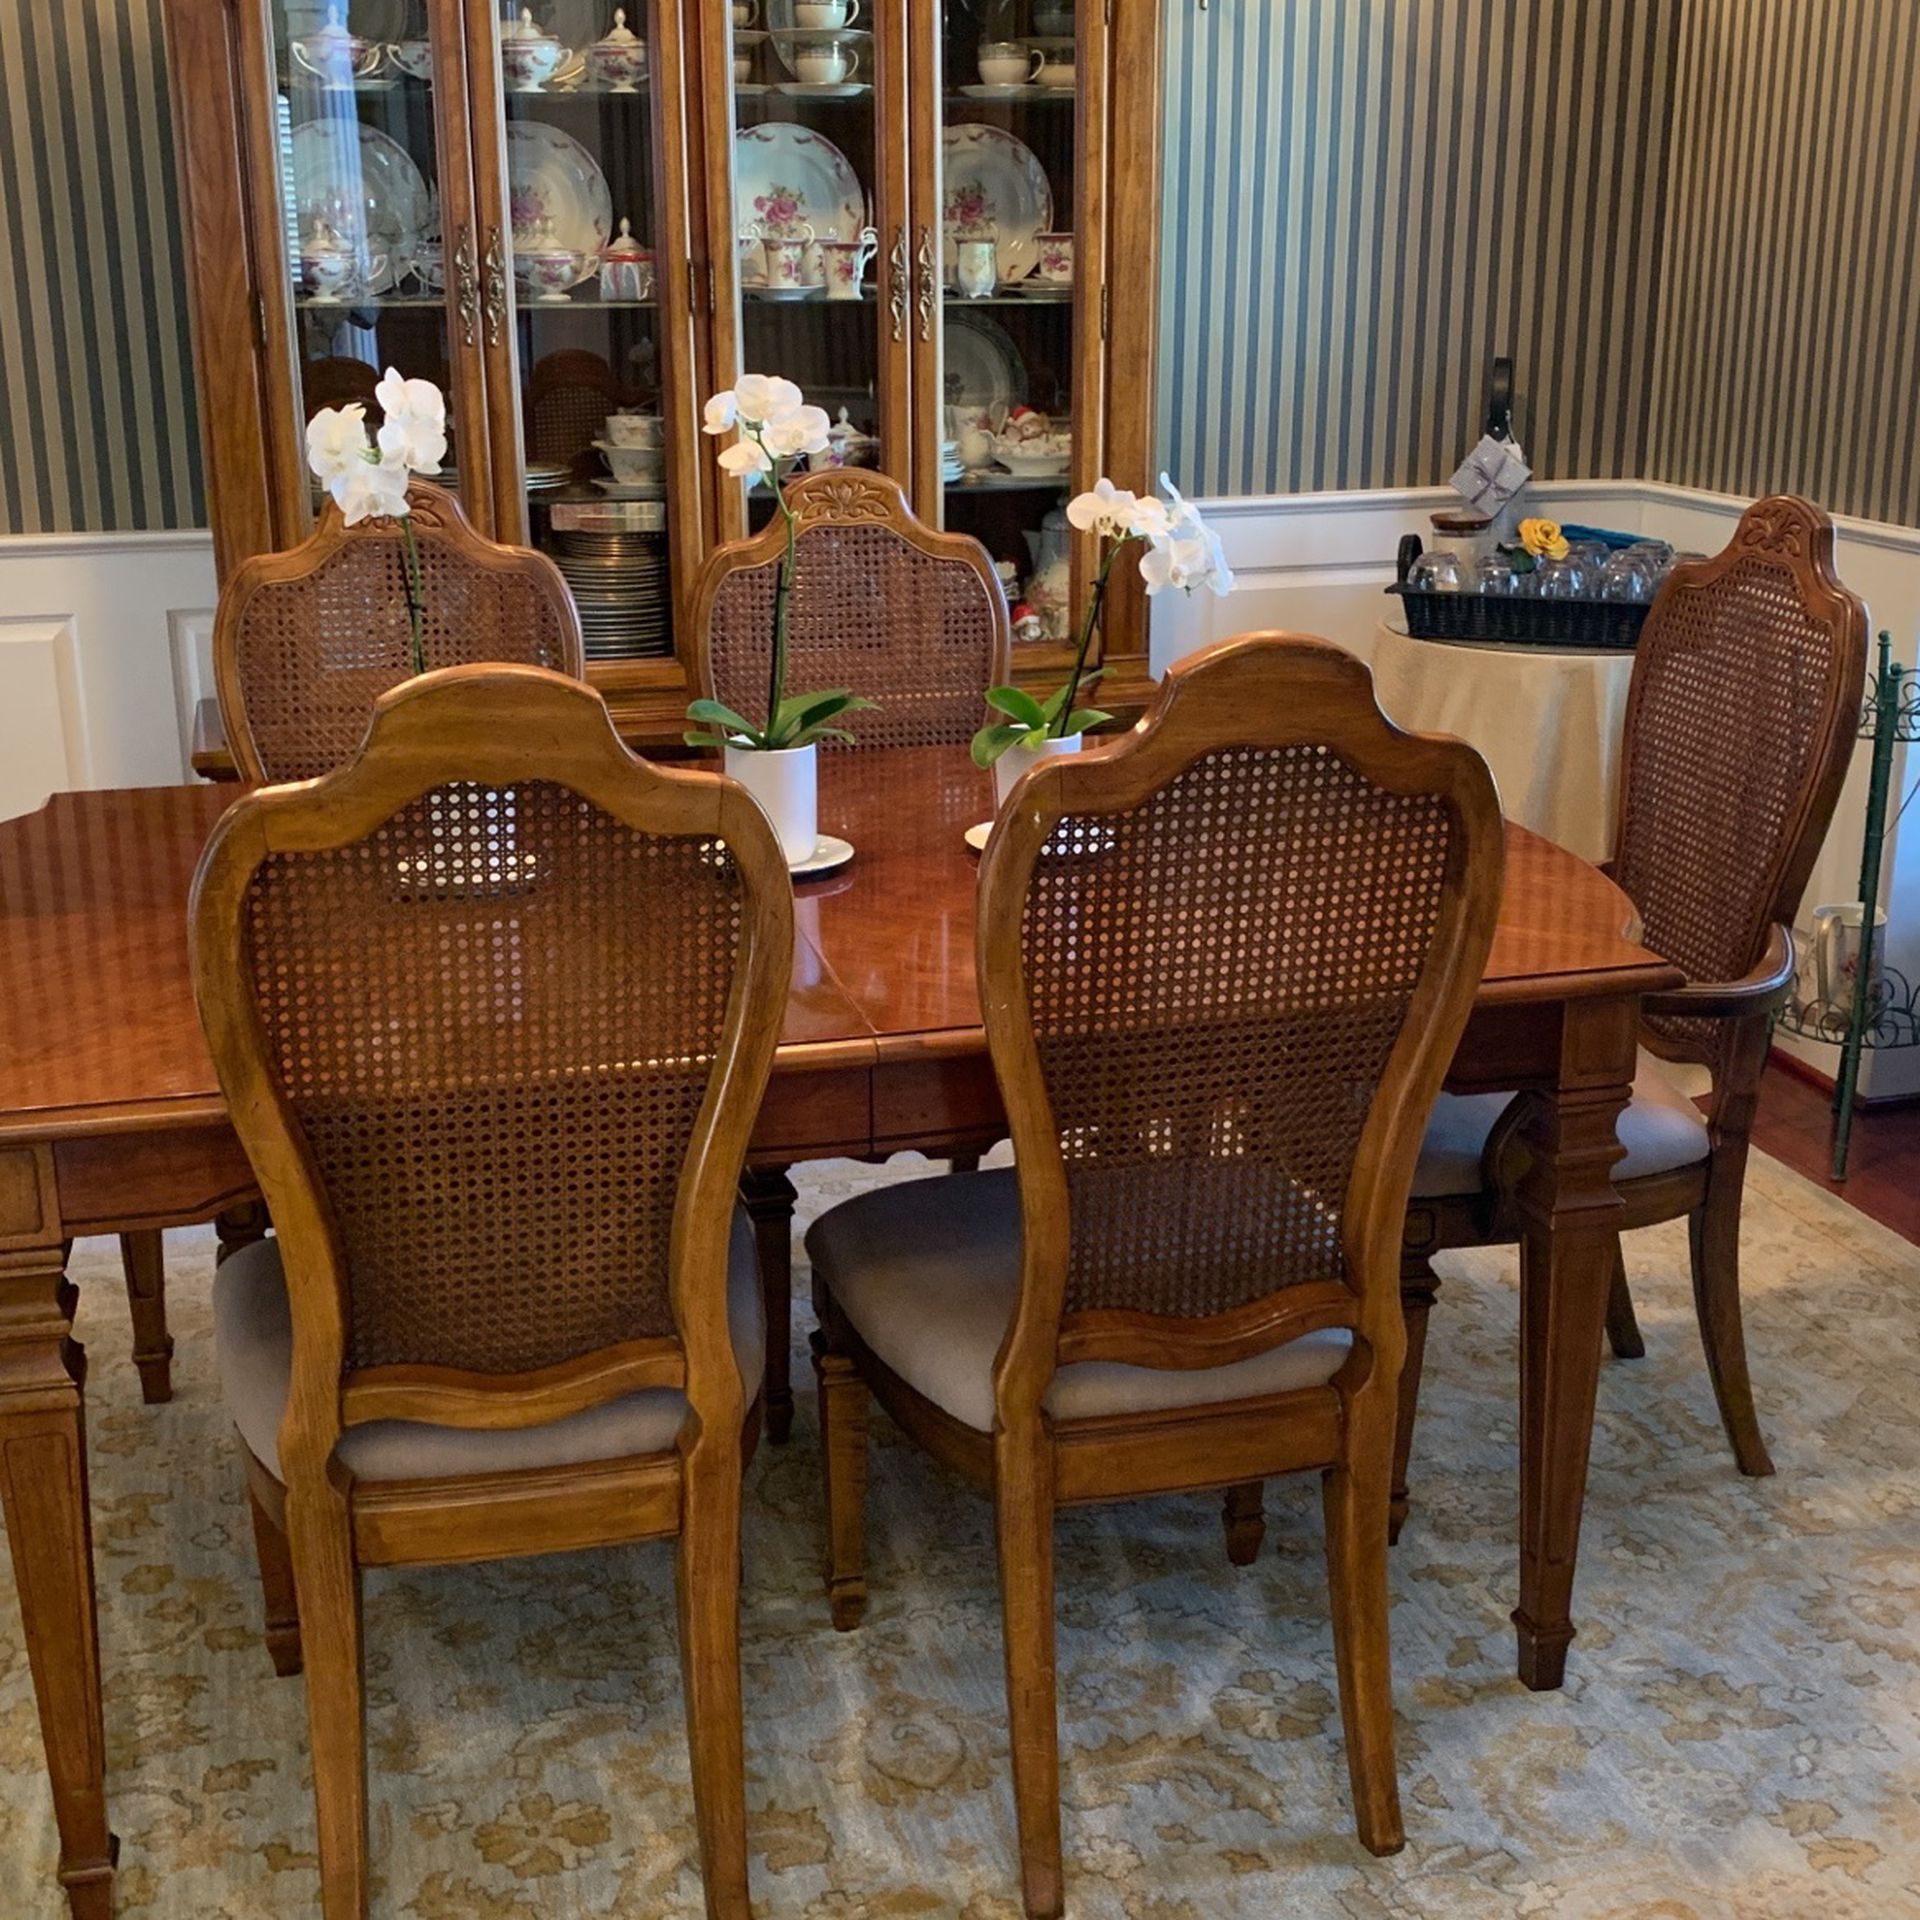 Pecan Wood Dining Room Set with 6 Newly Upholstered Chairs and extra Leaf